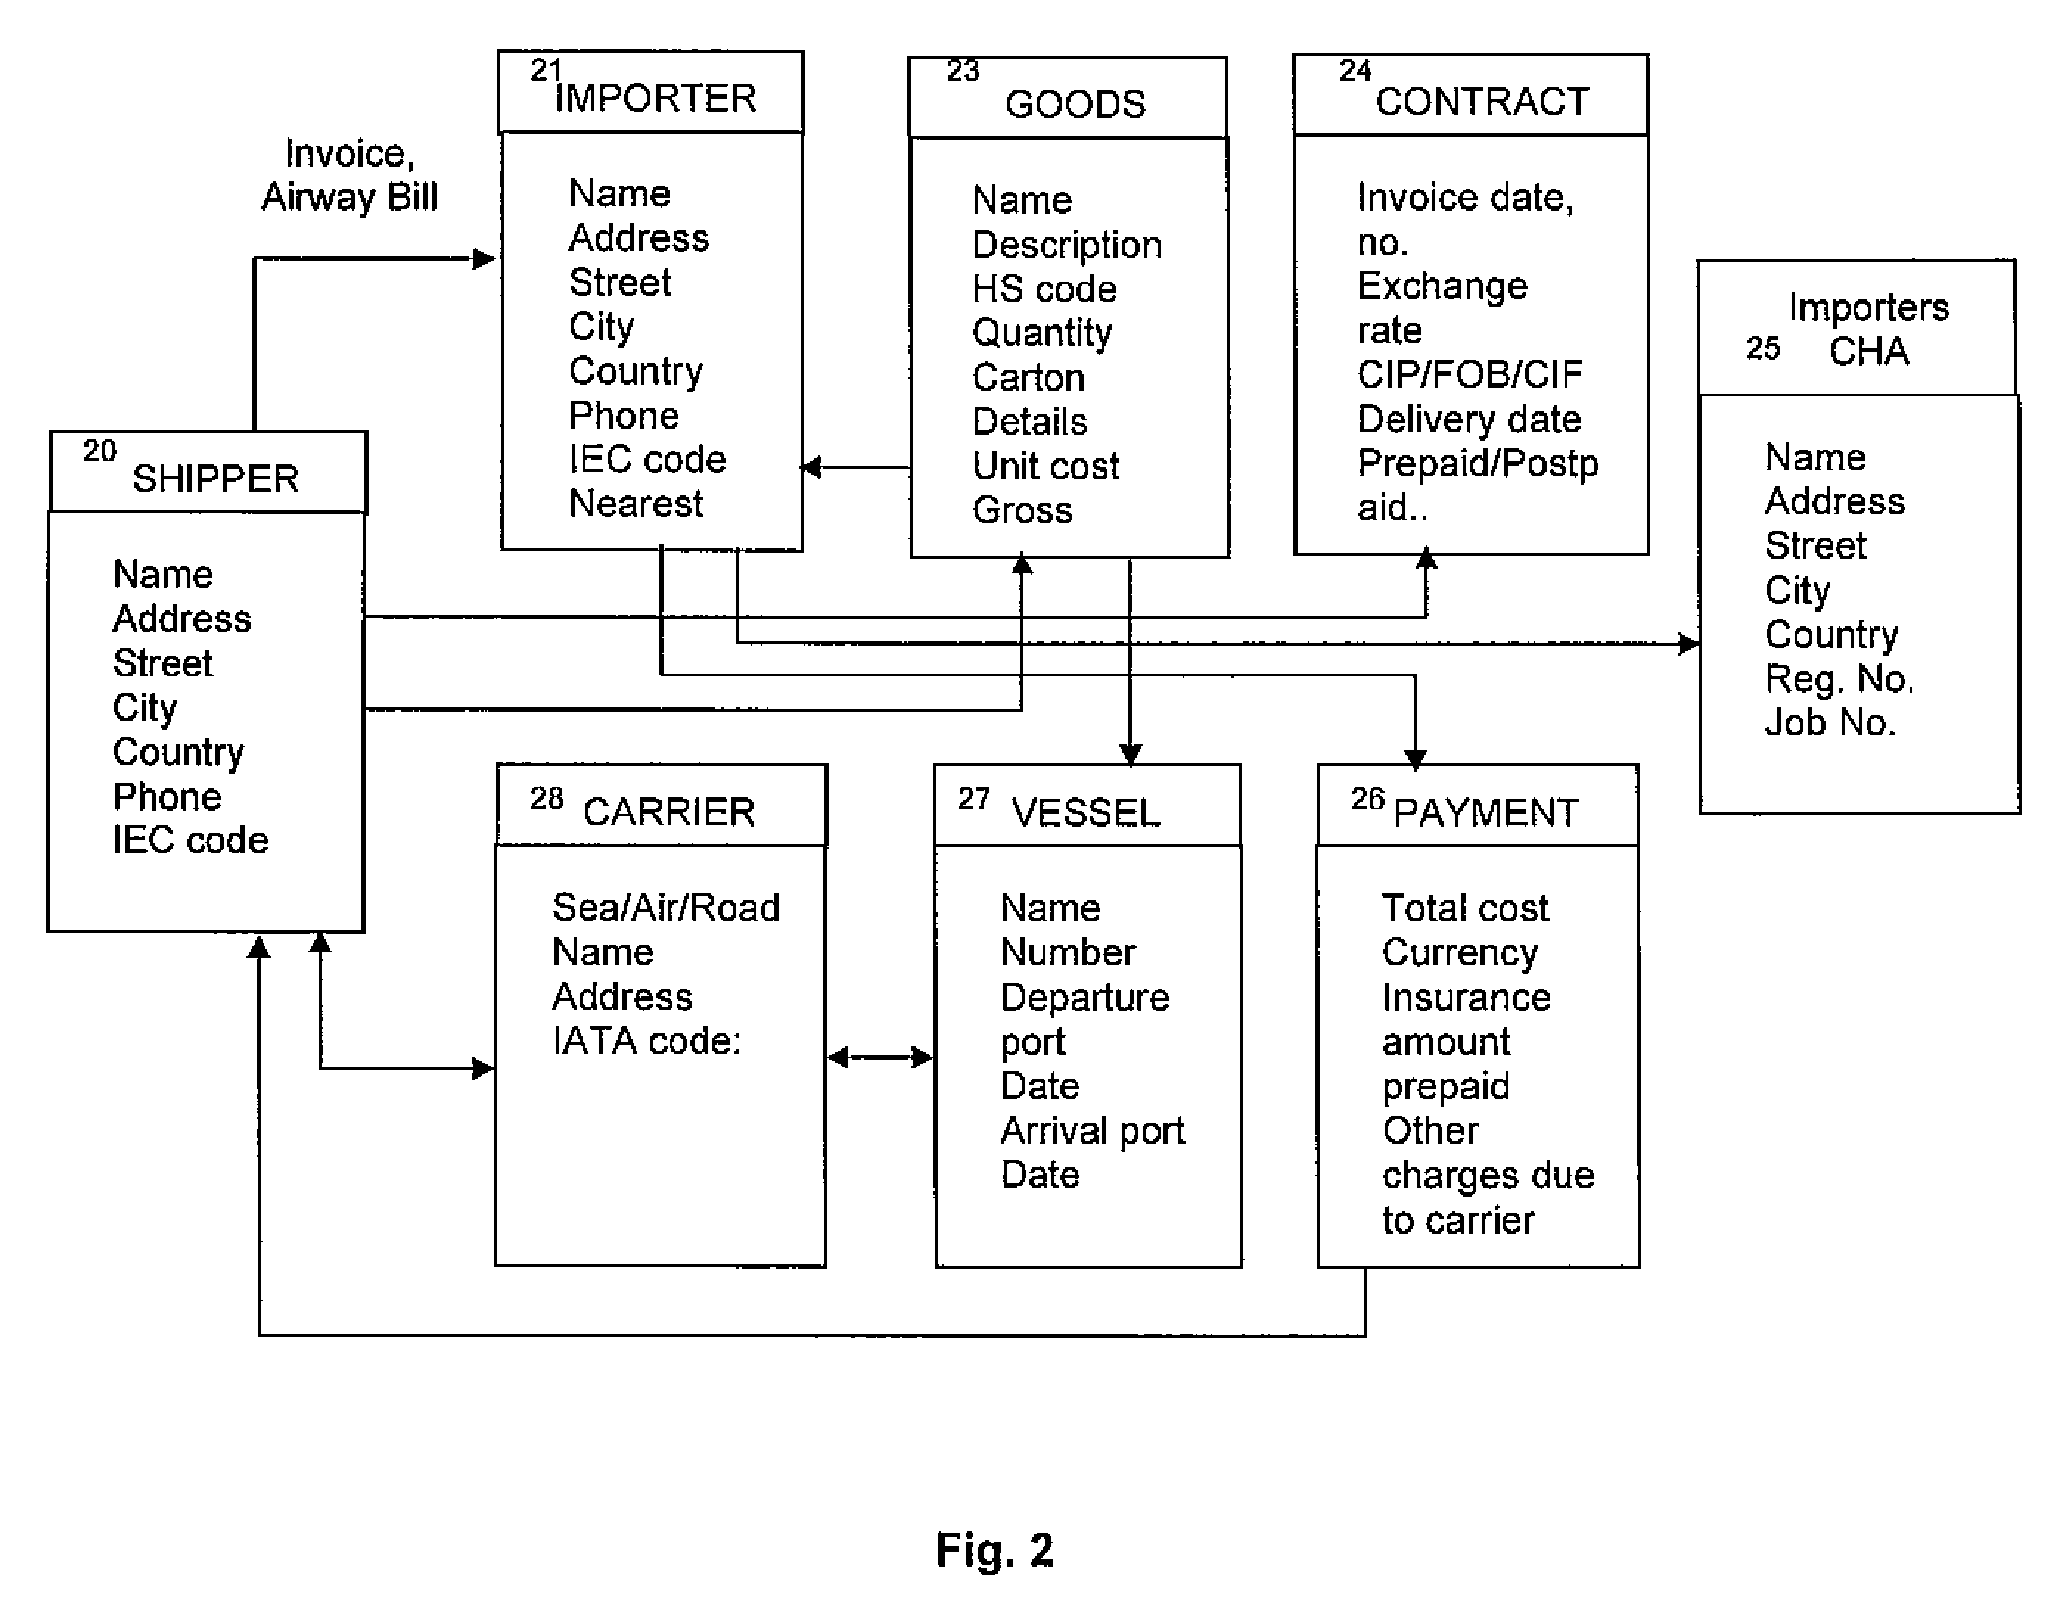 Method and system for knowledge-based filling and verification of complex forms